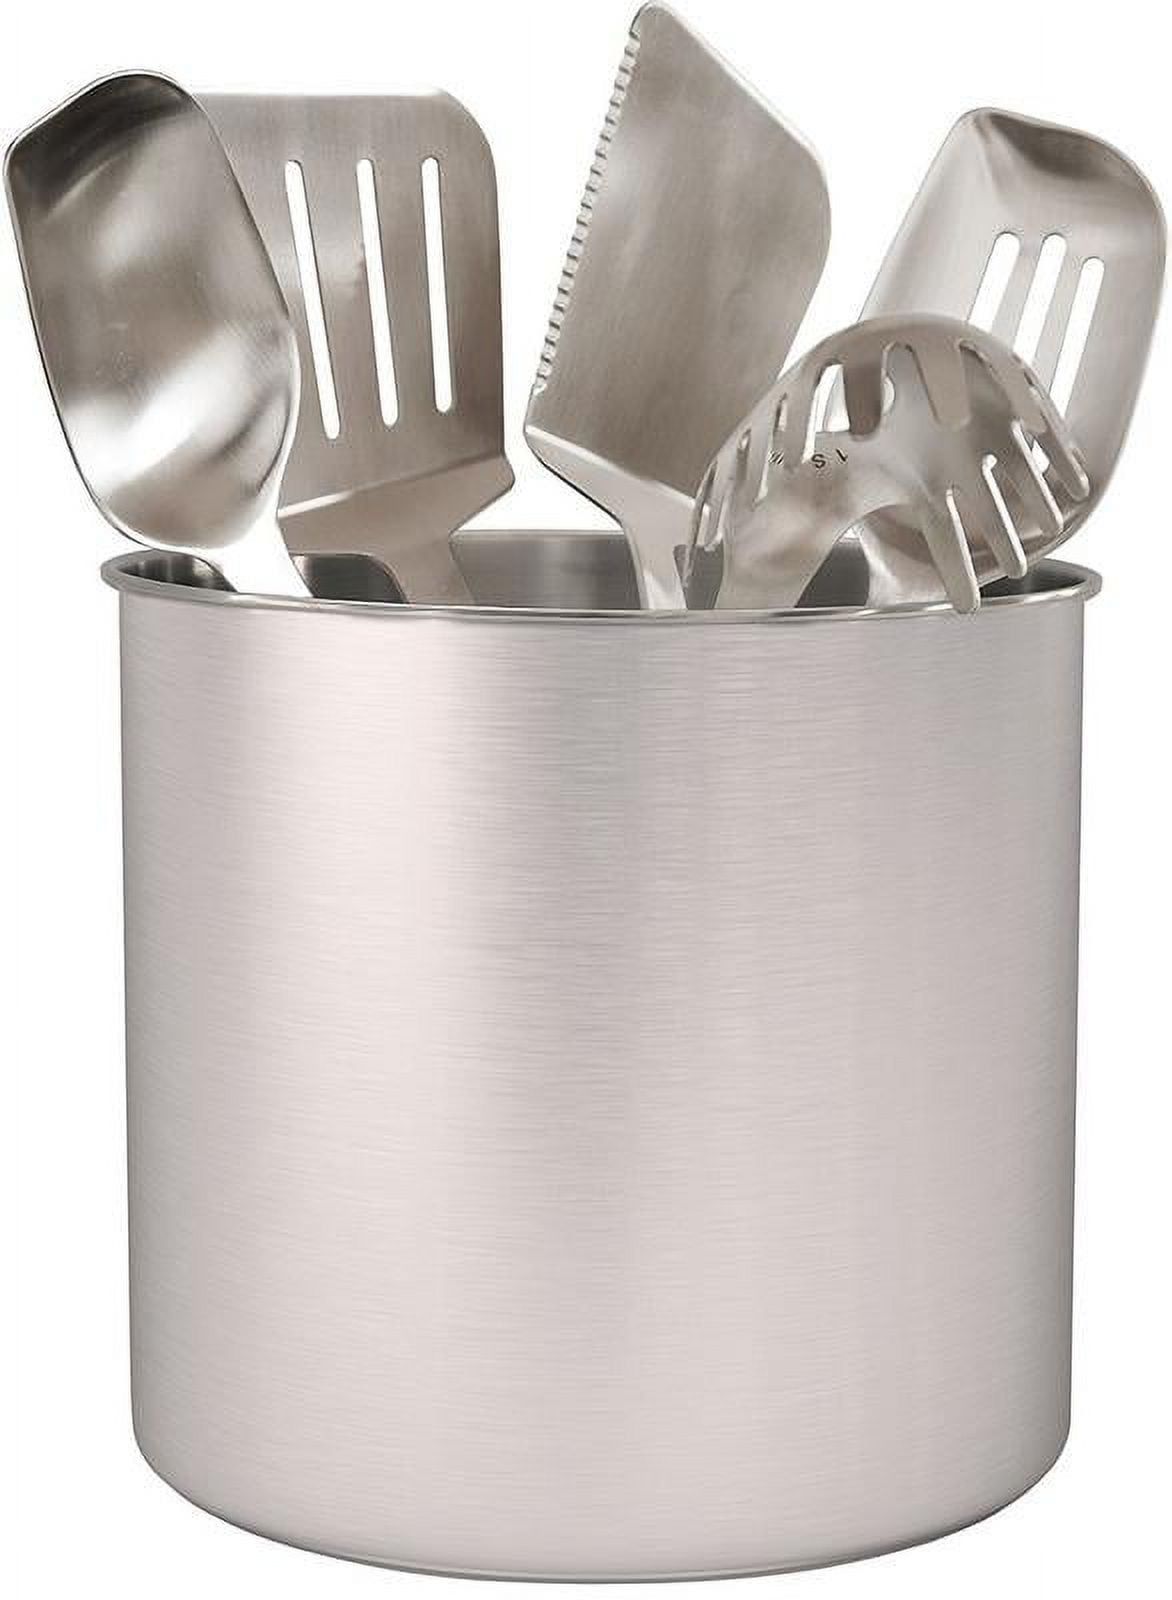 Cook N Home Stainless Steel Utensil Holder Jumbo 2PC Set, 5.5-inch x  6.3-inch and 6.3-inch x 7.08-inch, Silver